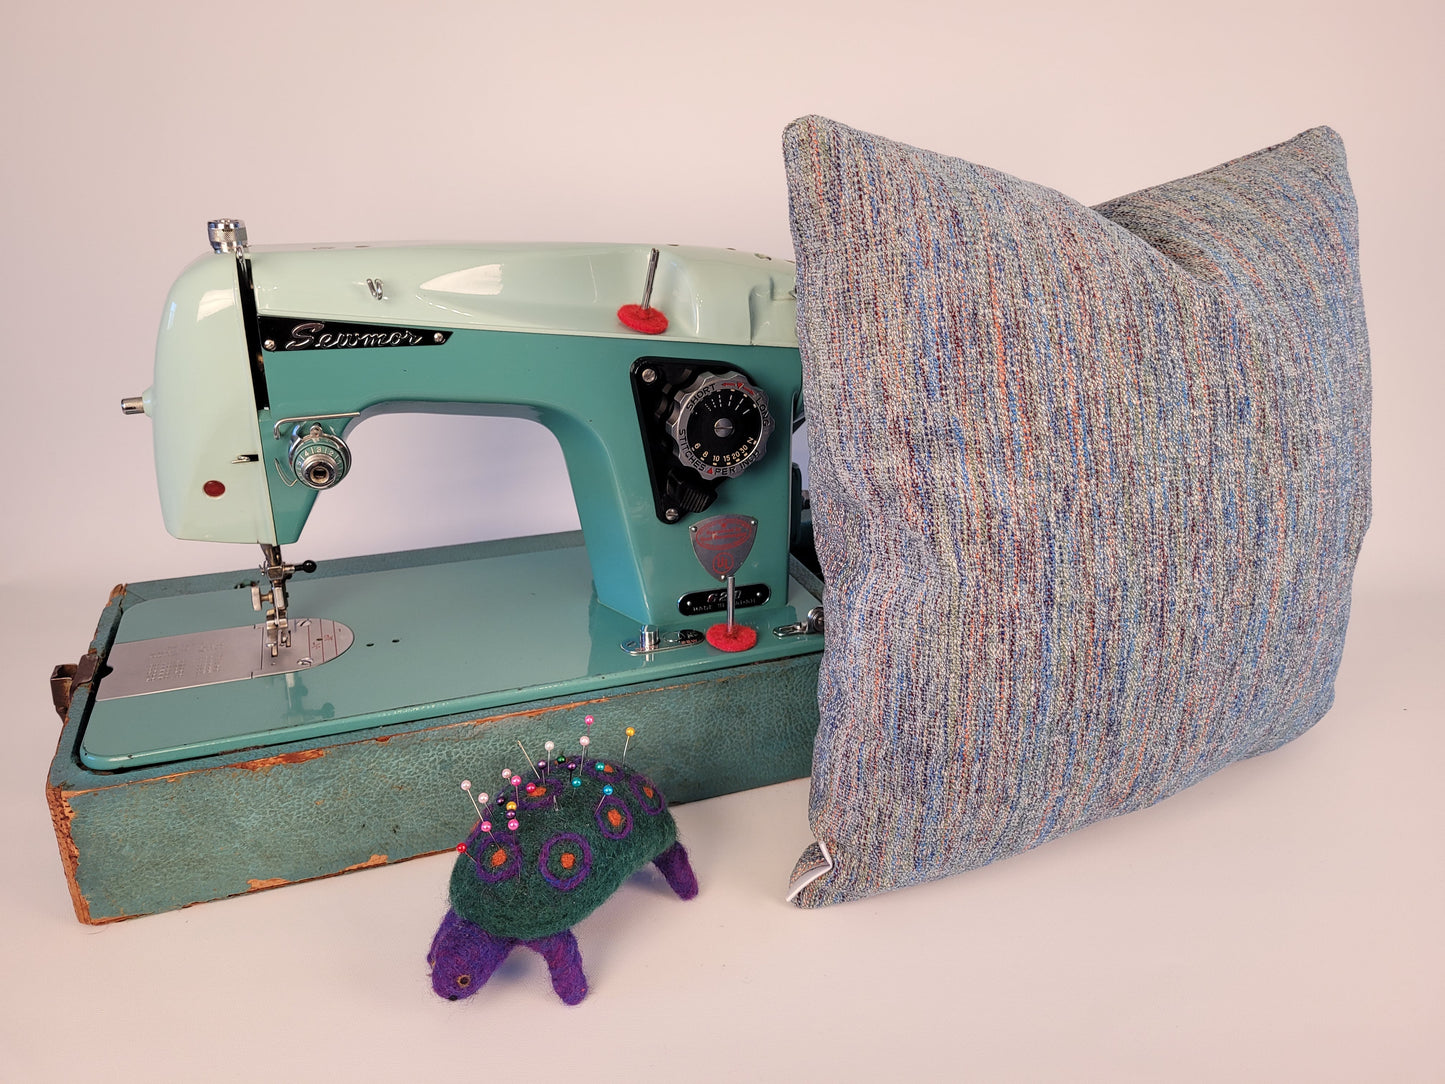 Turquoise Tweed Accent Pillow 16" poly insert  created with 1955 sewmor 620 vintage sewing machine  